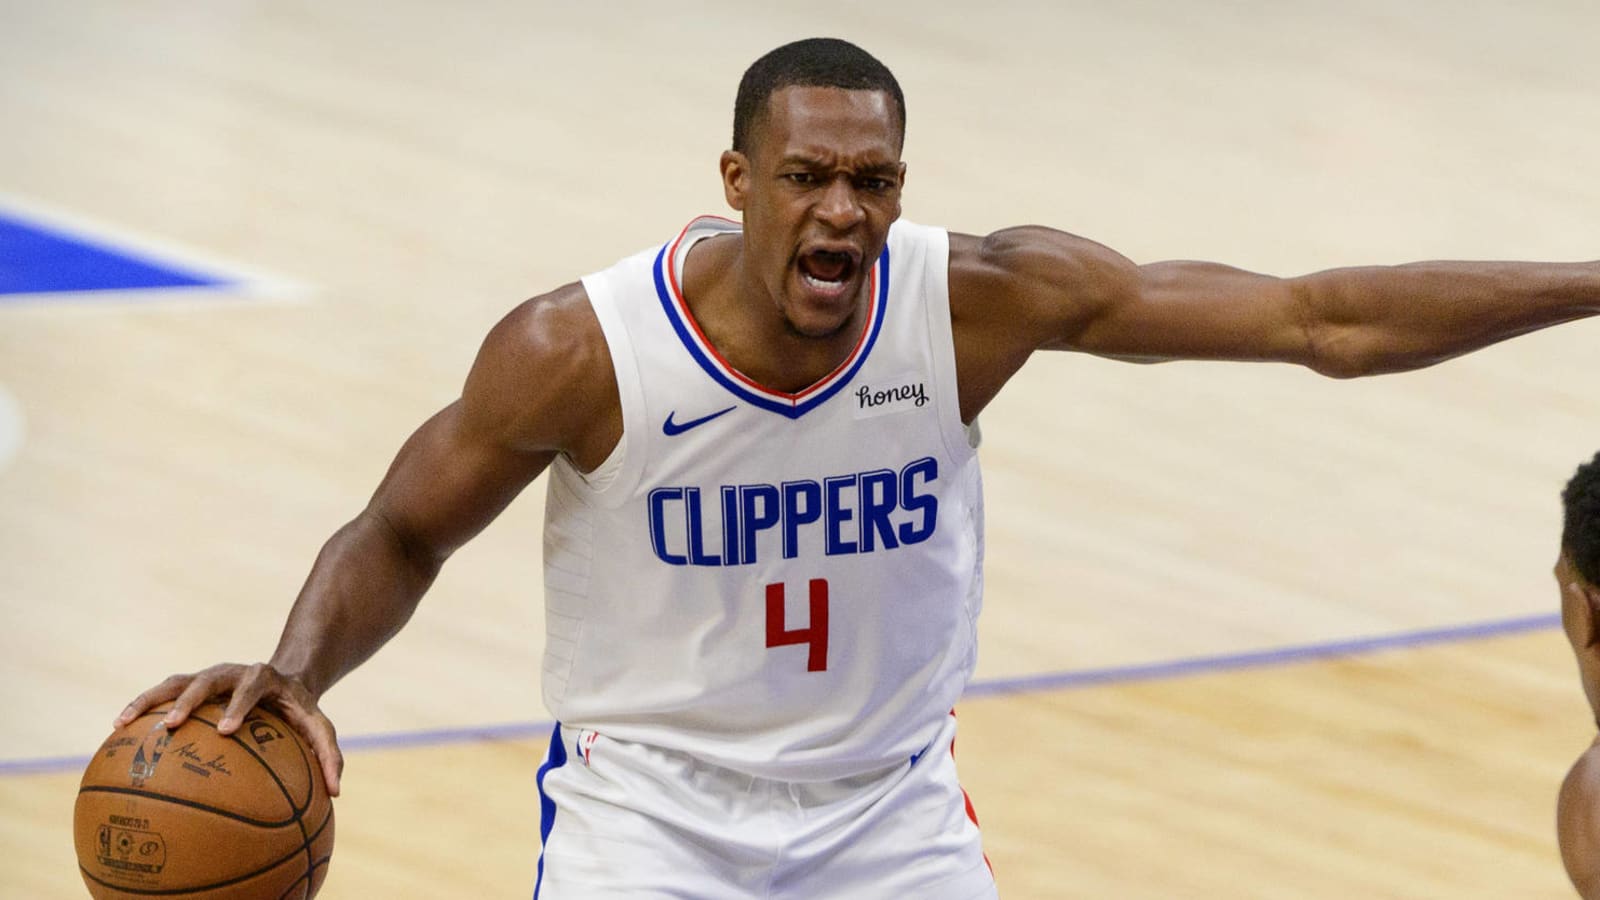 Rajon Rondo after Clippers' Game 3 win: 'We haven't done anything special'